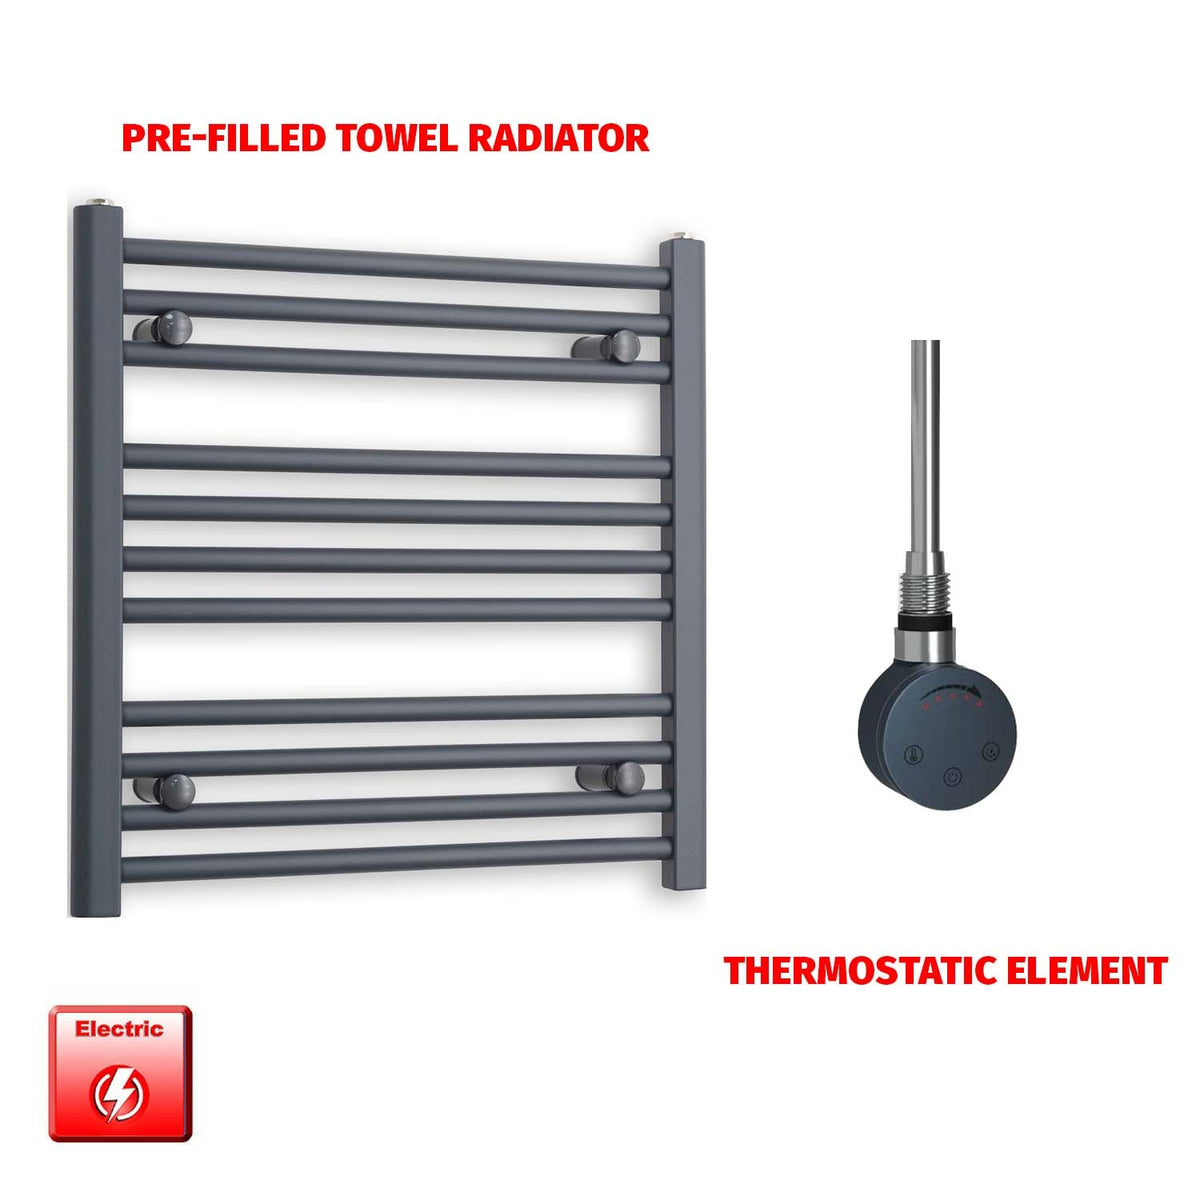 600mm High 500mm Wide Flat Anthracite Pre-Filled Electric Heated Towel Rail Radiator HTR SMR Thermostatic element no timer